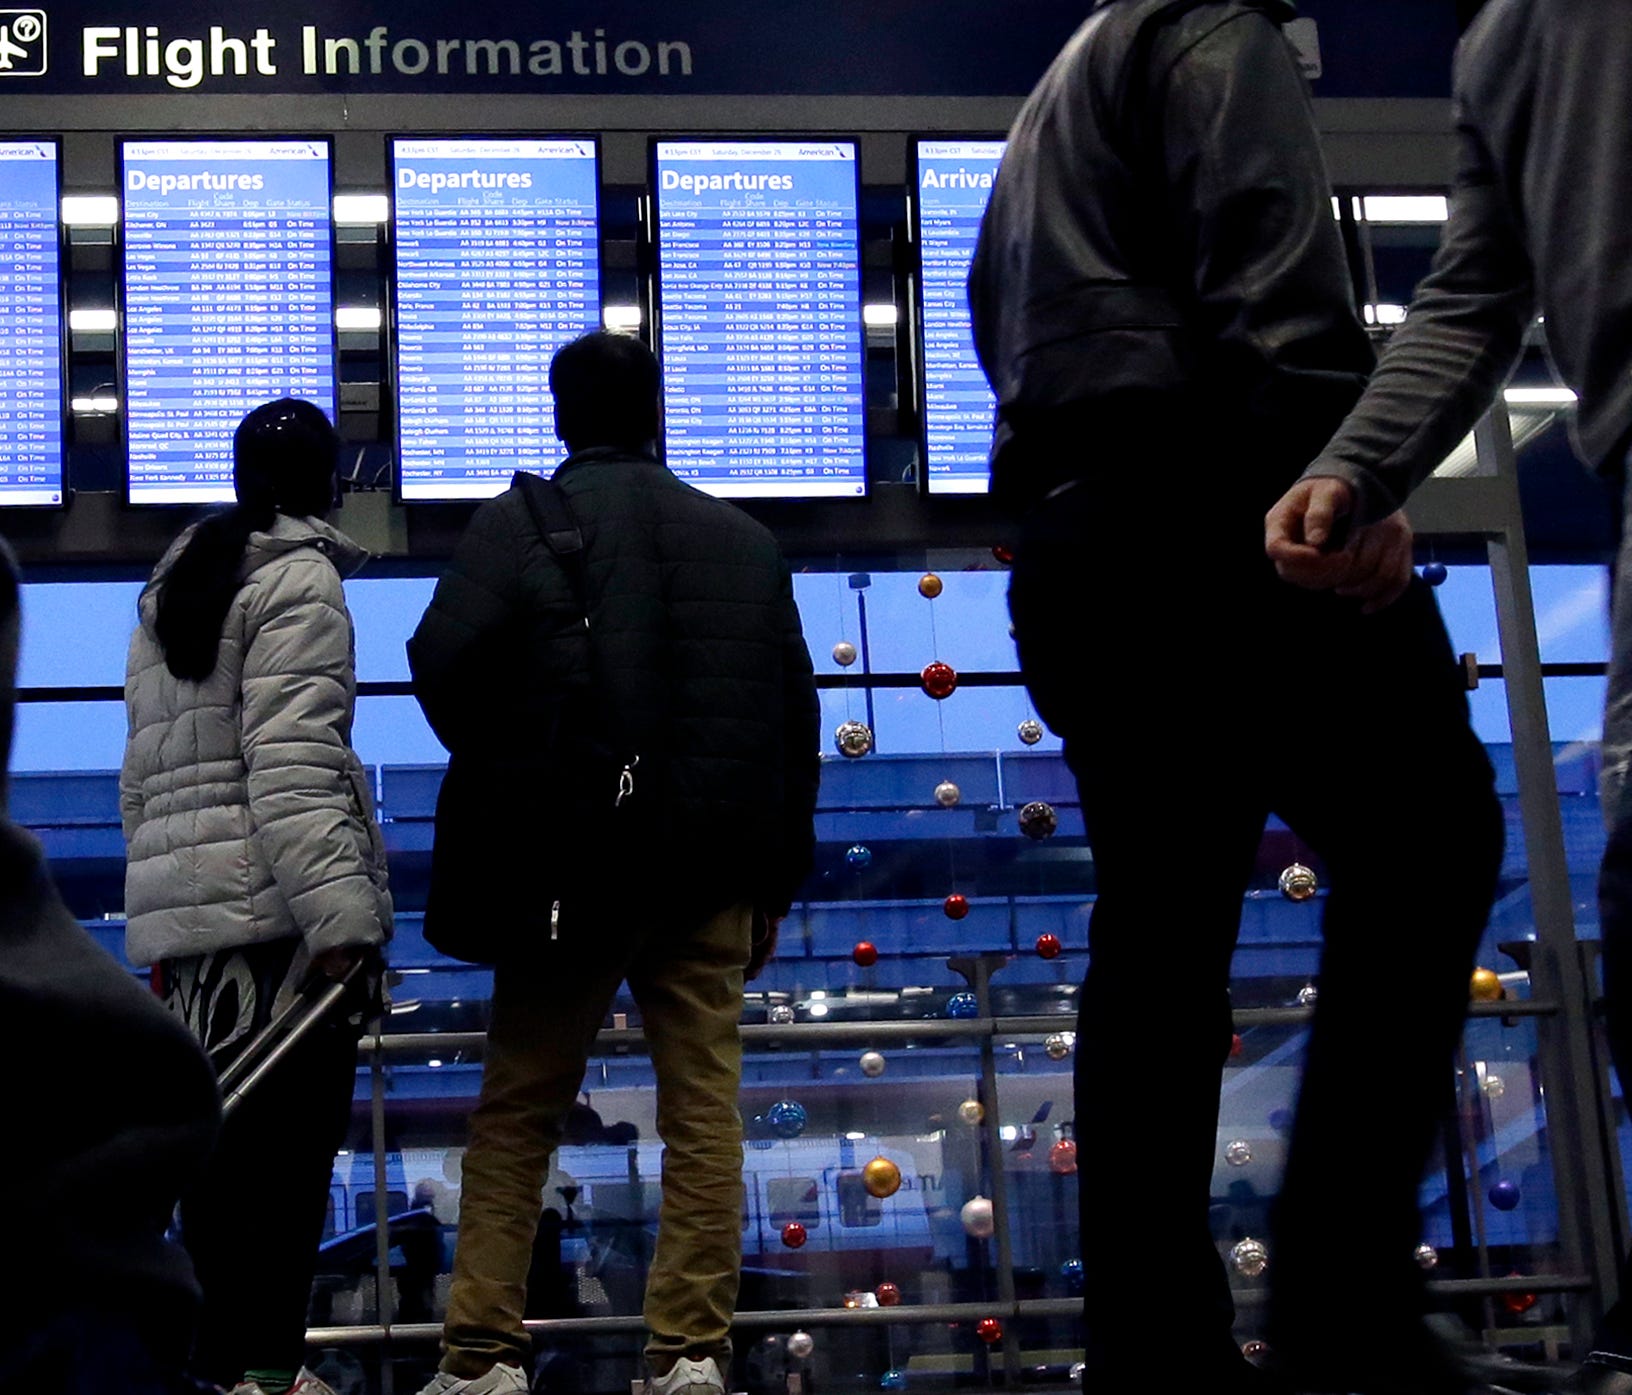 Travelers walk to their gates at Chicago's O'Hare International Airport on Dec. 26, 2015.